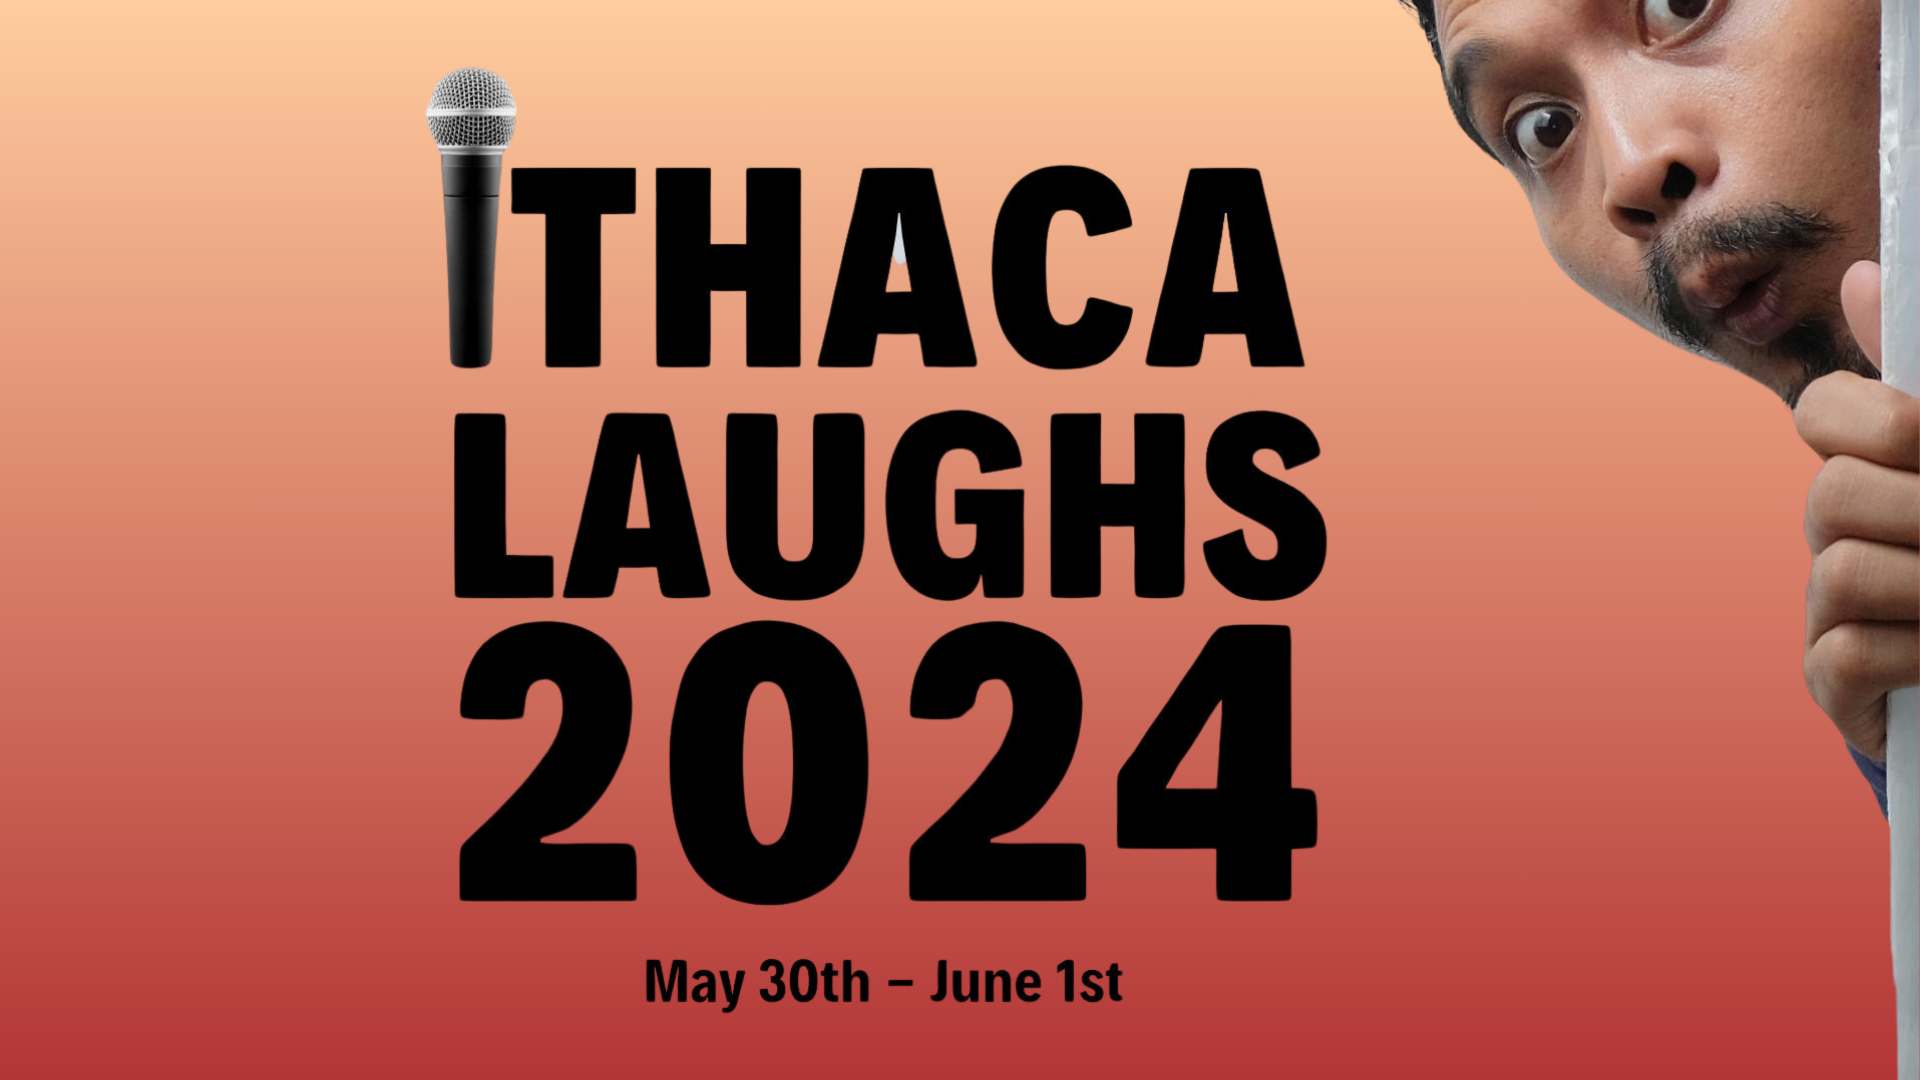 Comedy Kickoff: Ithaca Laughs Under the Stars